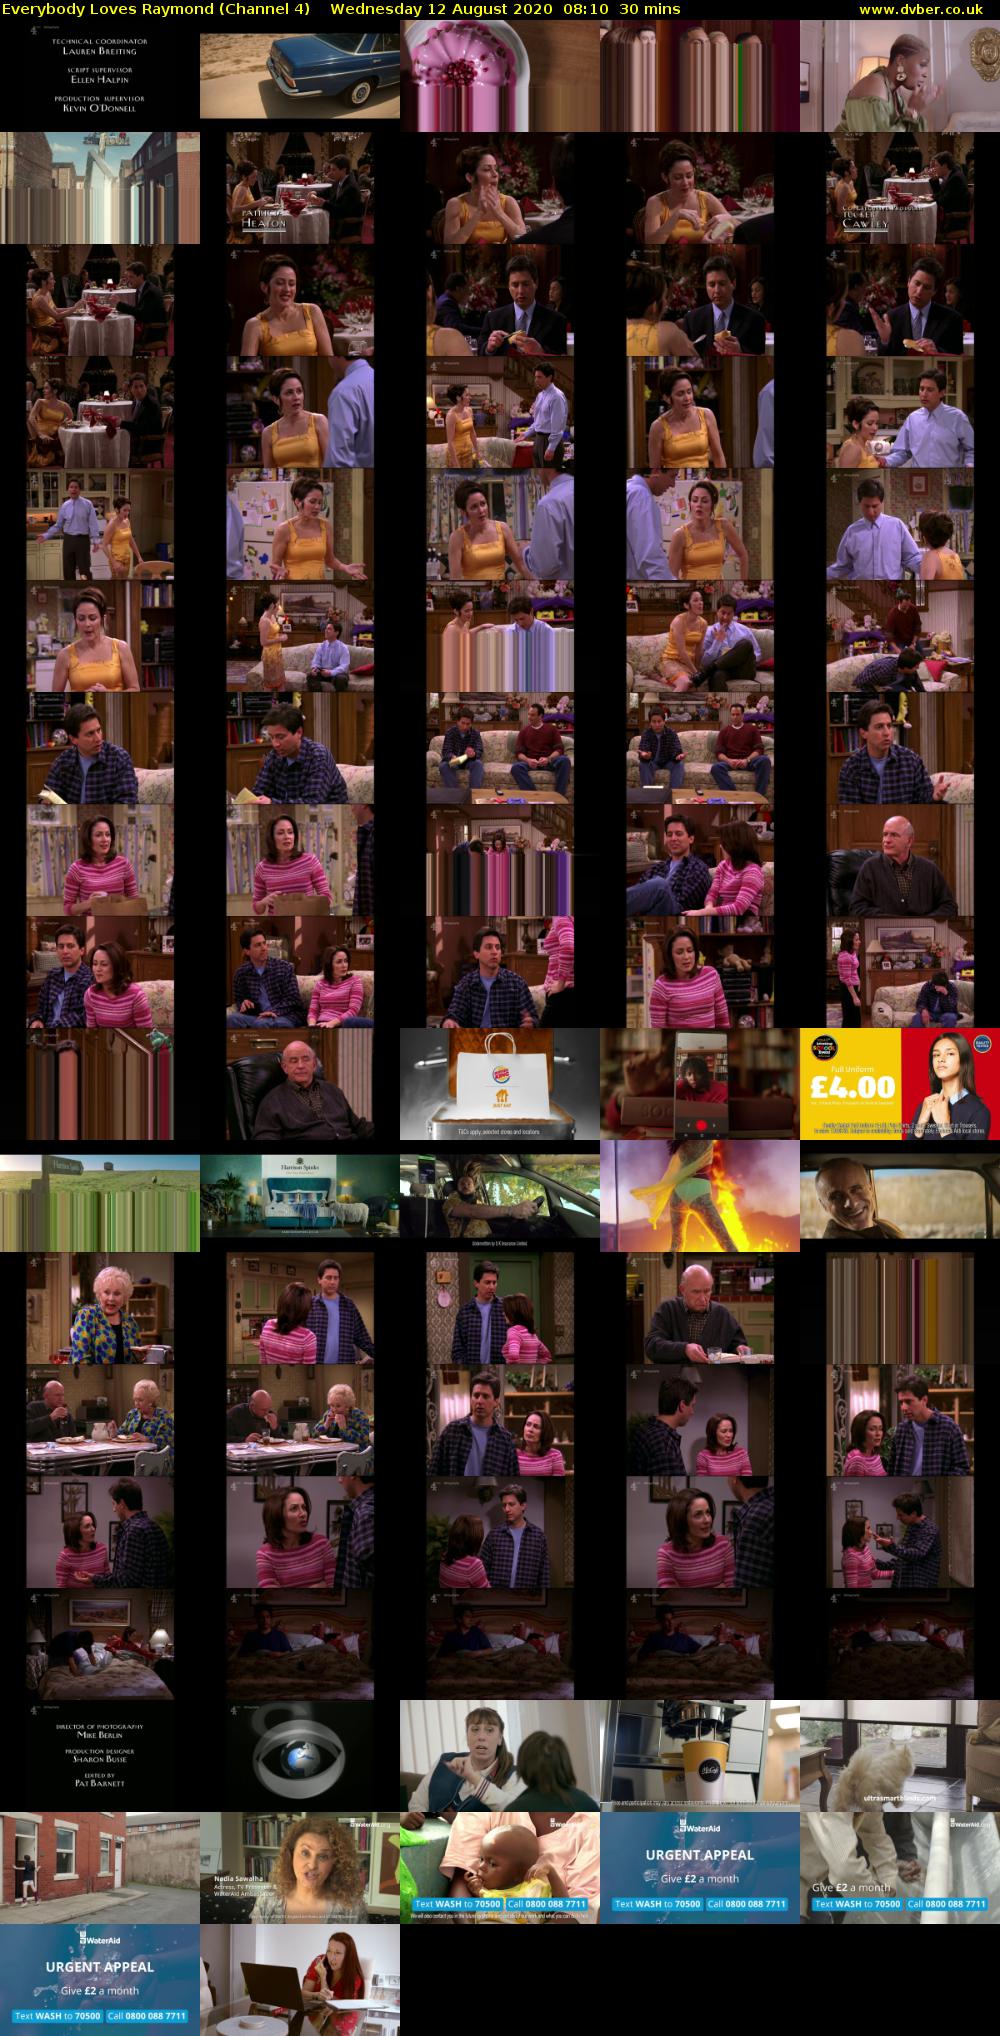 Everybody Loves Raymond (Channel 4) Wednesday 12 August 2020 08:10 - 08:40